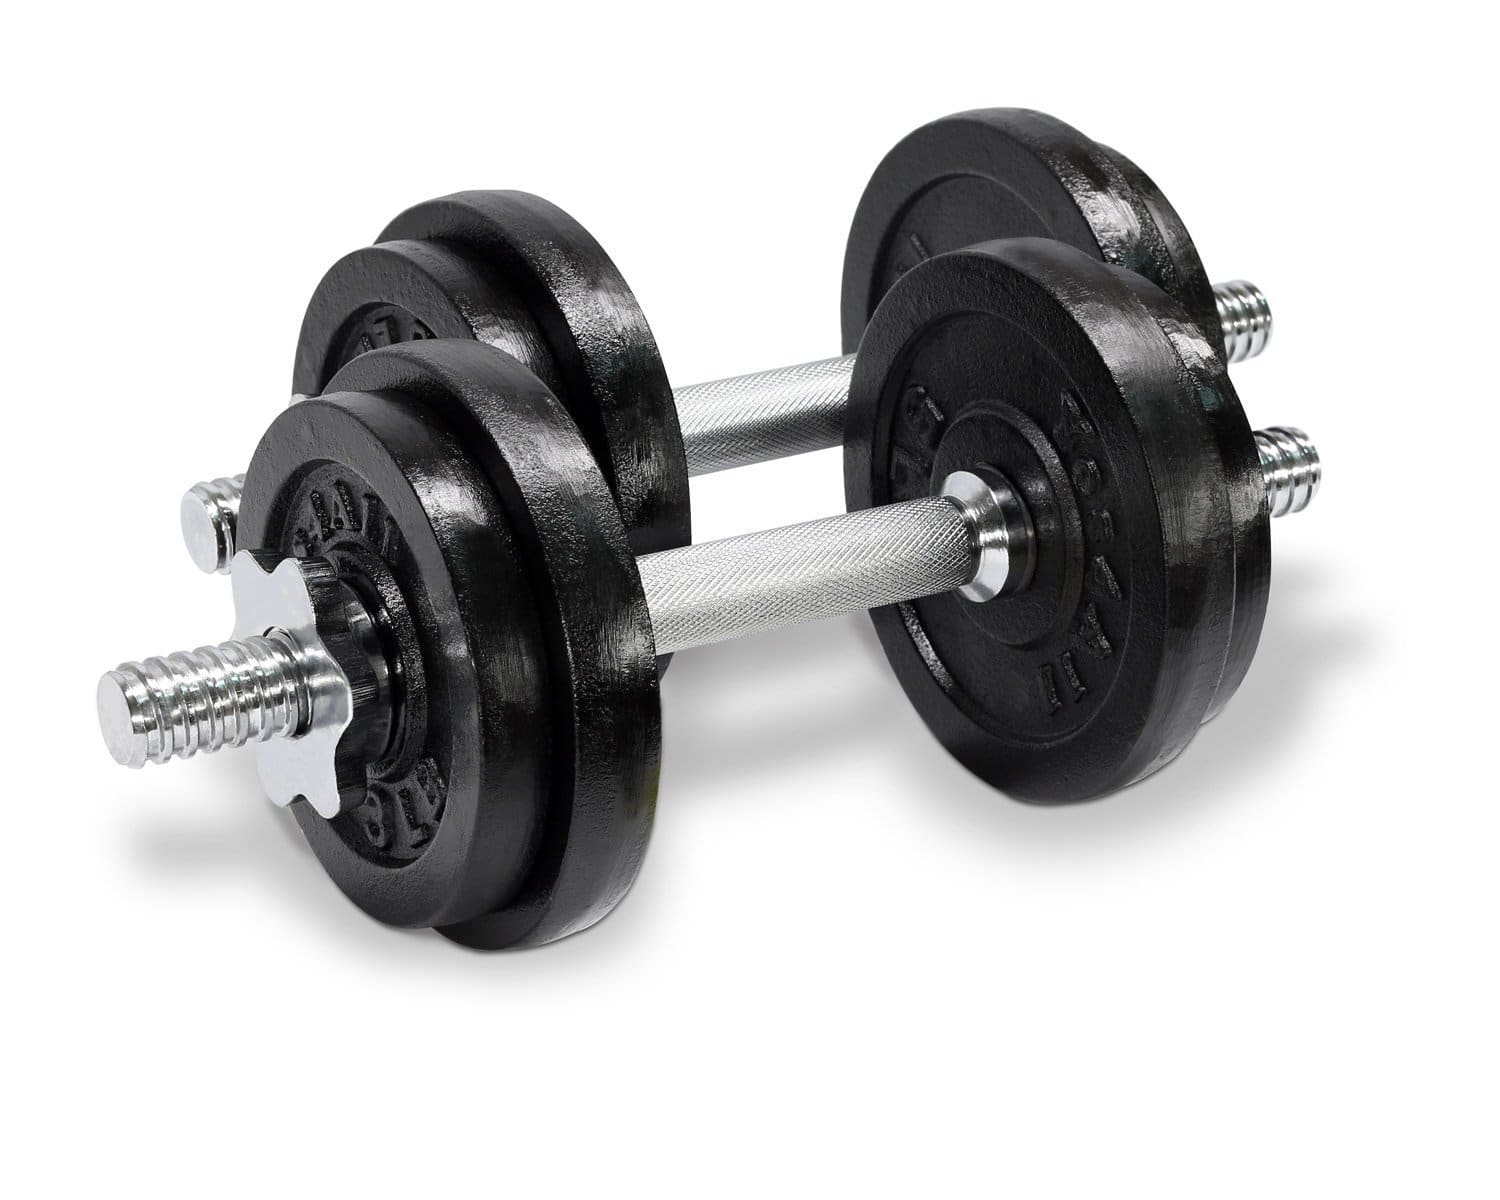 Yes4All Adjustable Dumbbells 40, 50, 52.5 , 60, 105 to 200 lbs